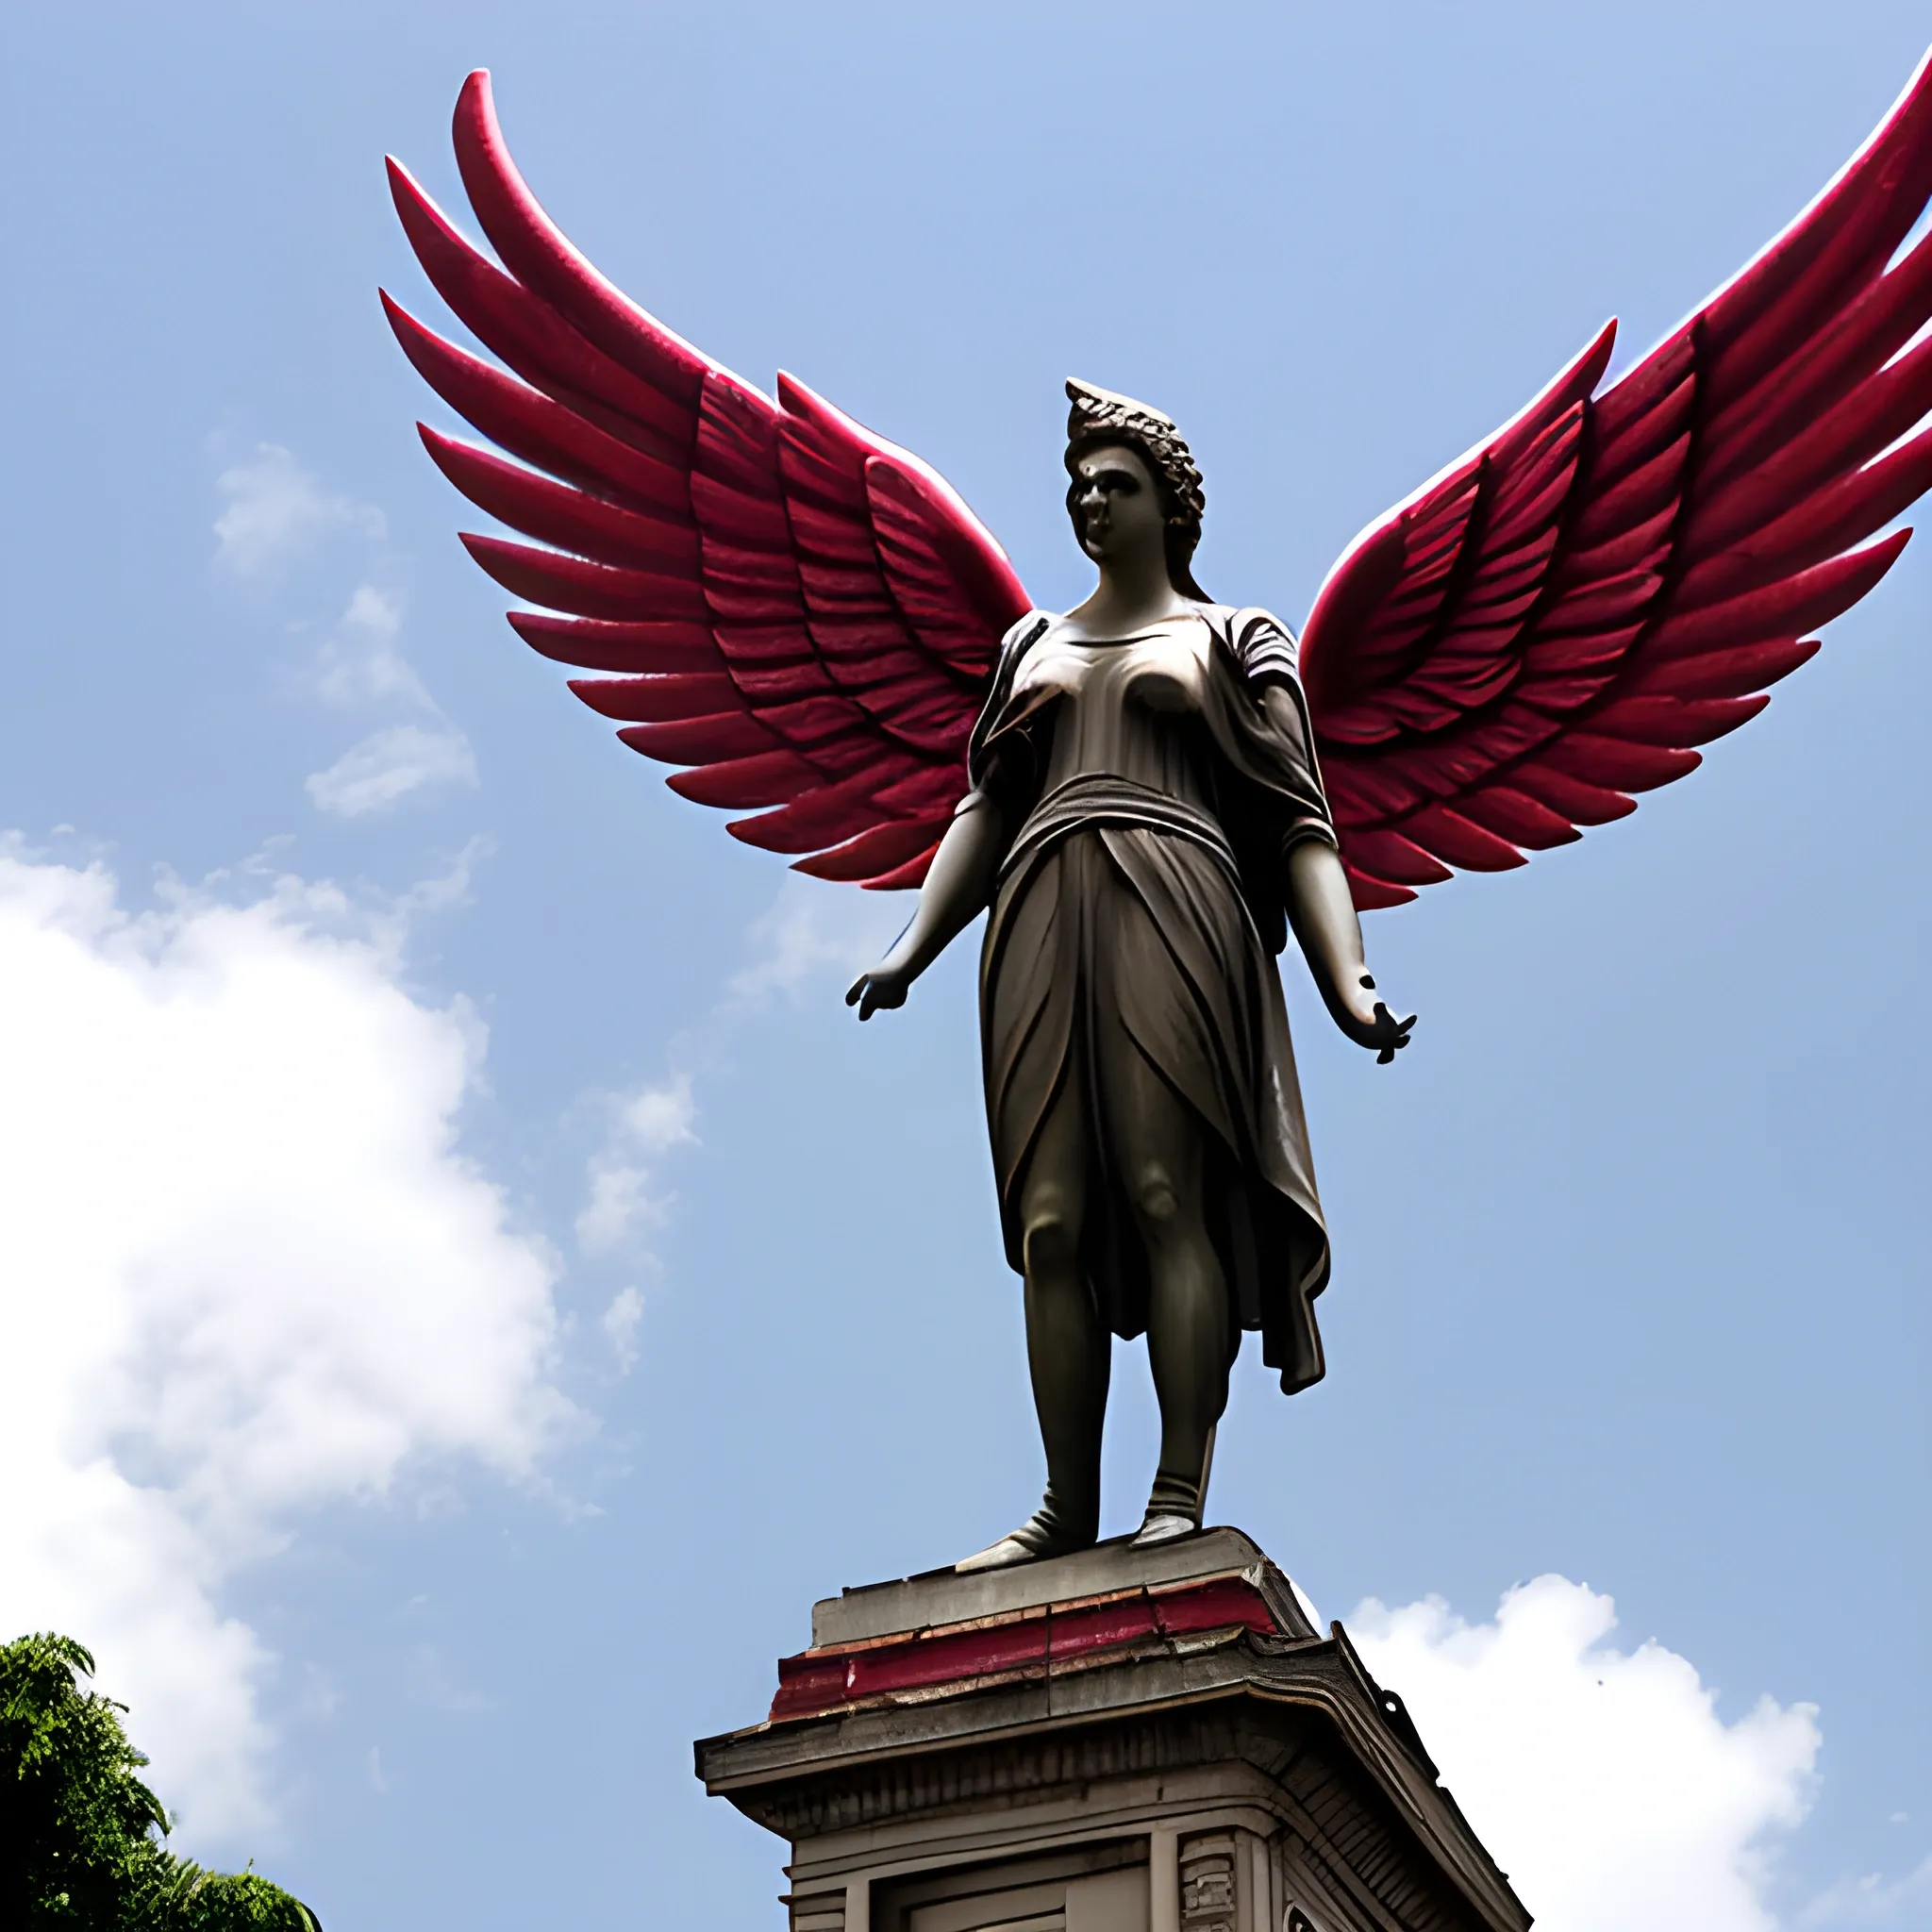 the angel of independence in mexico city, a red heart